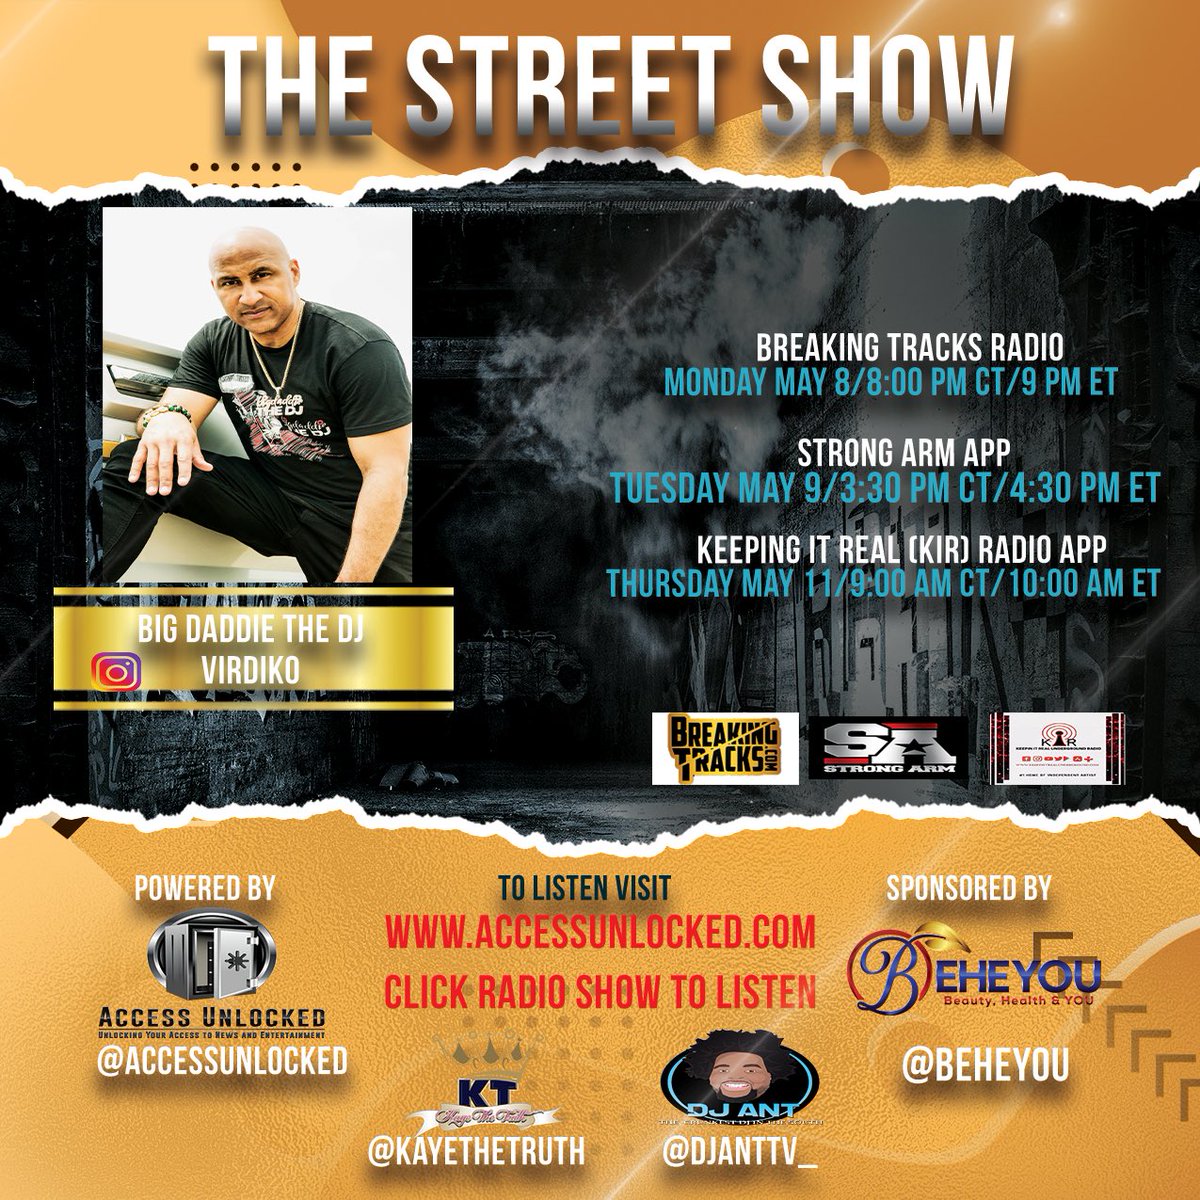 Tune in this week to The Street Show with Kaye TheTruth, DJ Ant guest Big Daddie The DJ of VirDiKo @virdiko @djanttv_ @kayethetruth @accessunlocked #KayeTheTruth #DJAnt #TheStreetShow #bigdaddiethedj #virdiko #business #djs #artist #smallbusiness #mixshow #newmusicalert